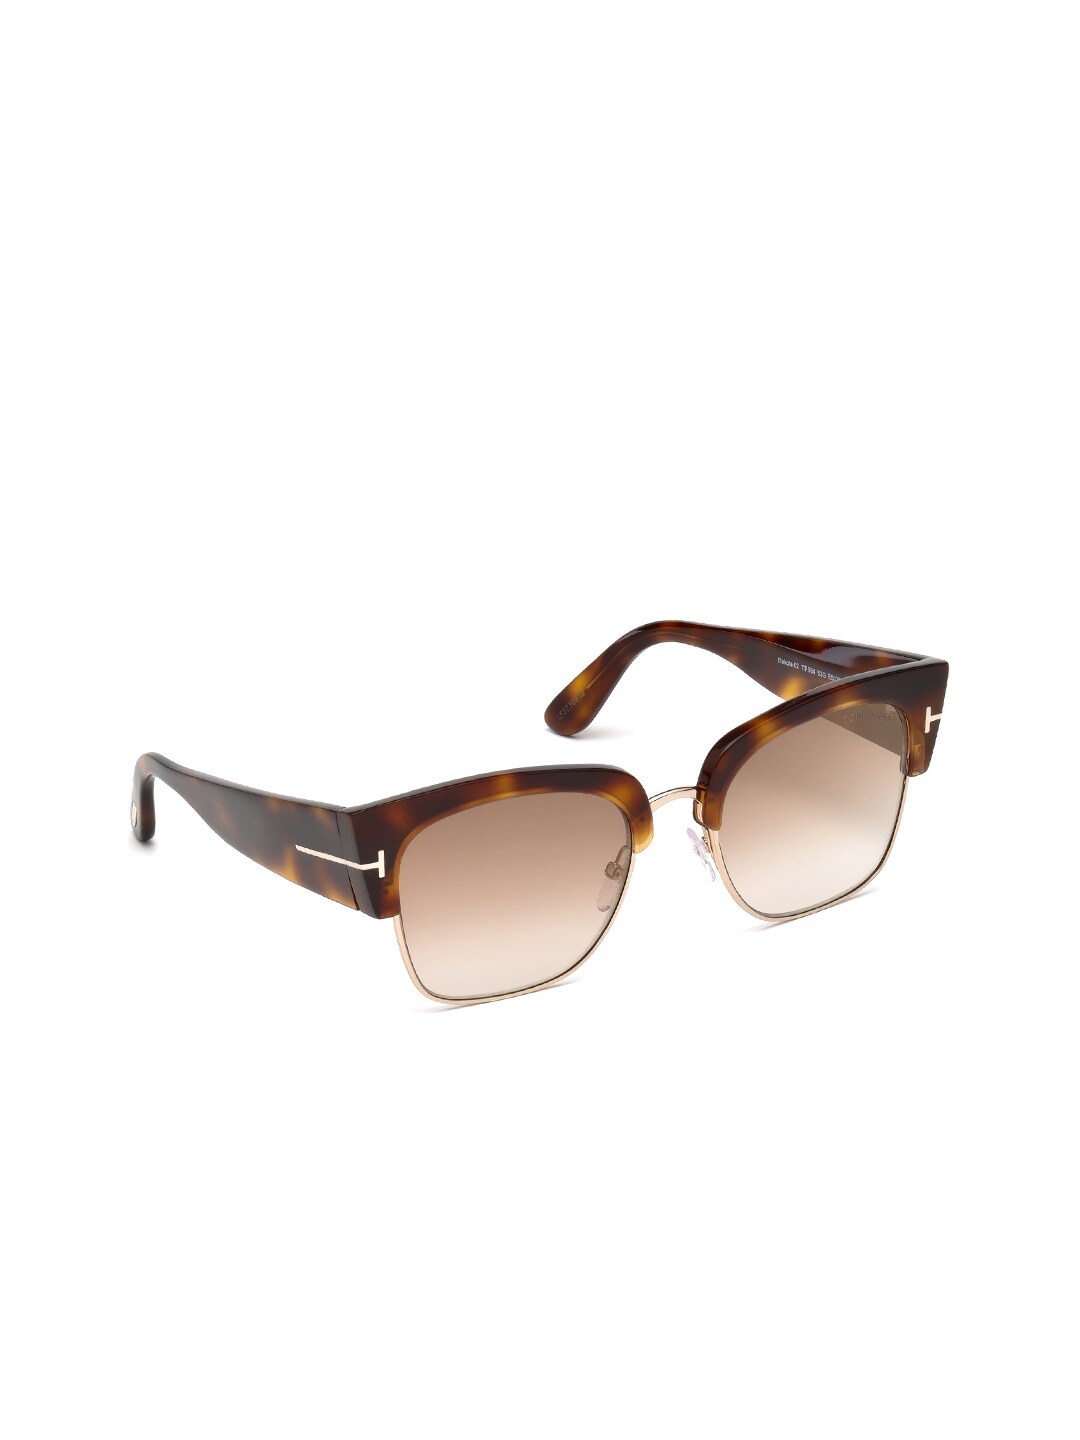 Tom Ford Women Brown Lens & Brown Square Sunglasses - FT0554 55 53G-Brown Price in India